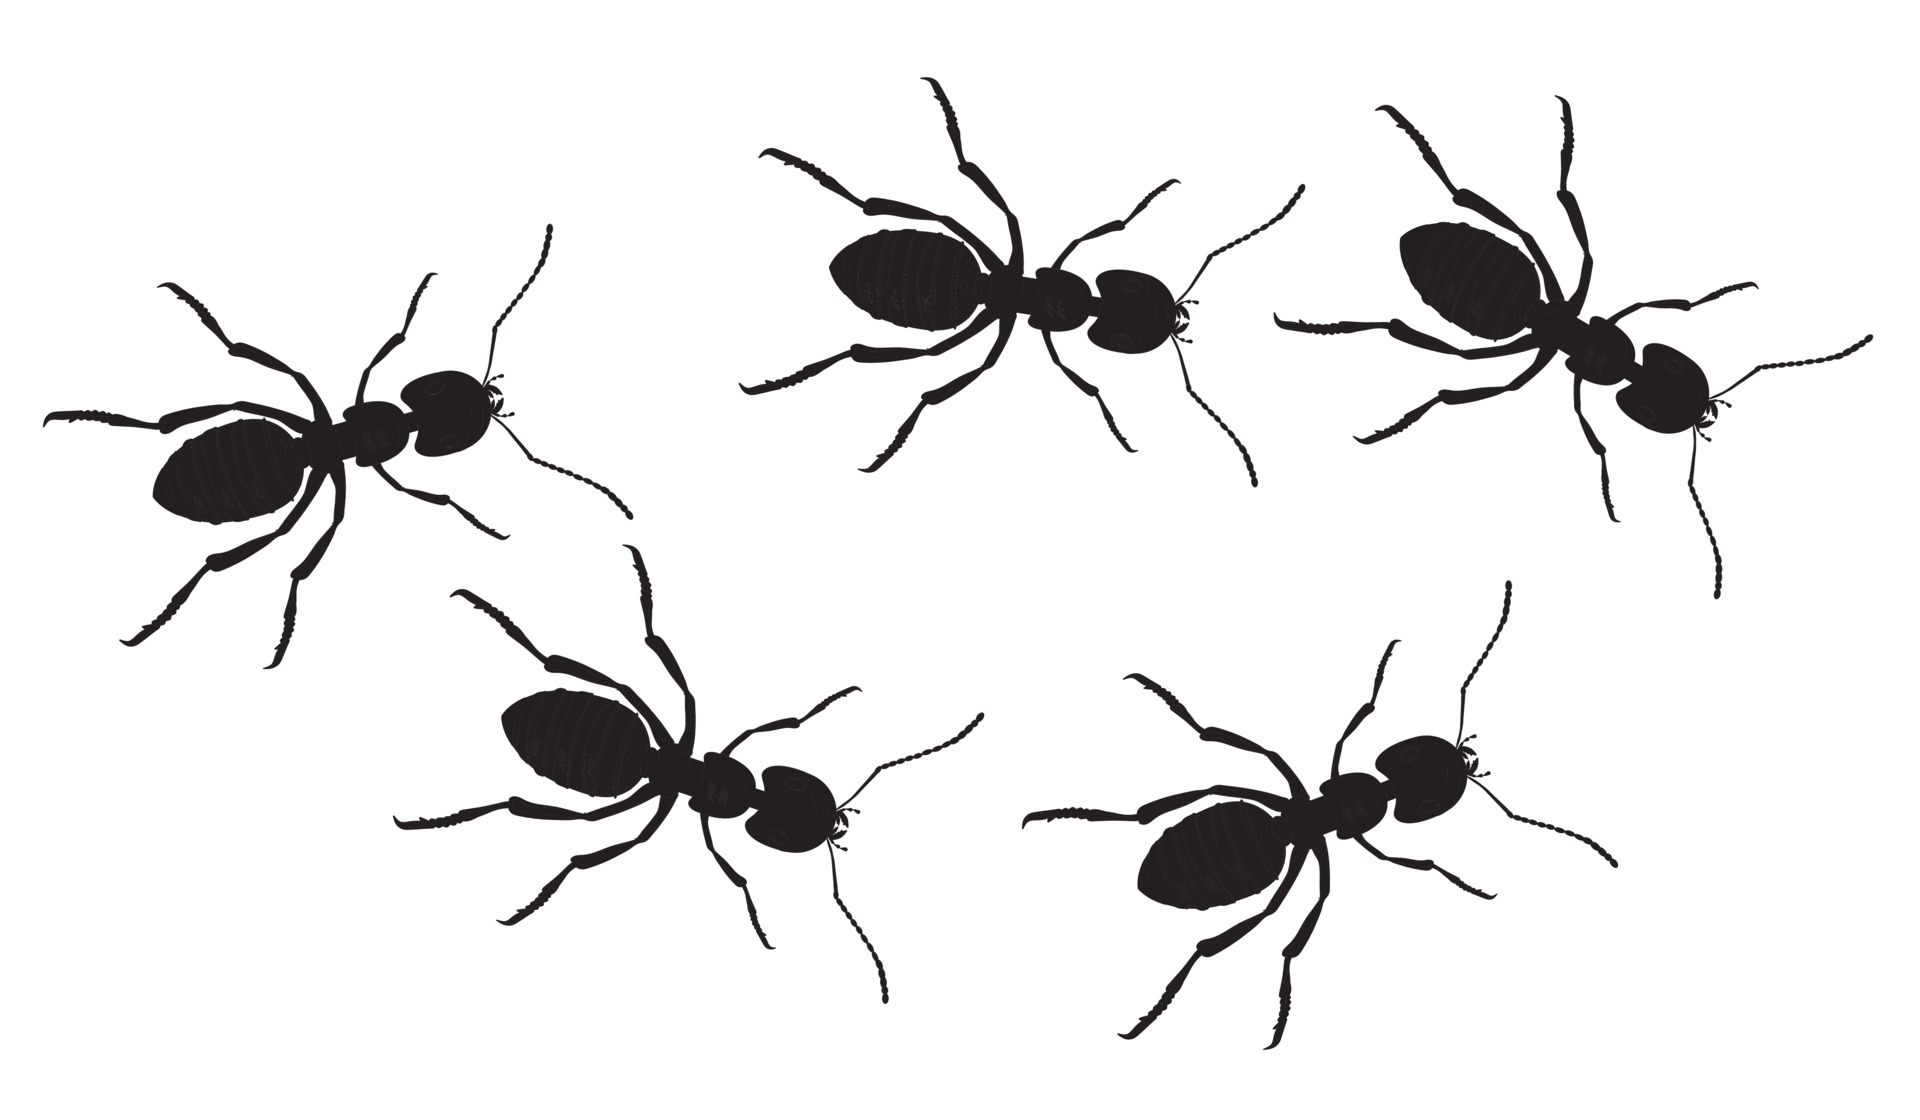 a line of worker ants marching in search of food